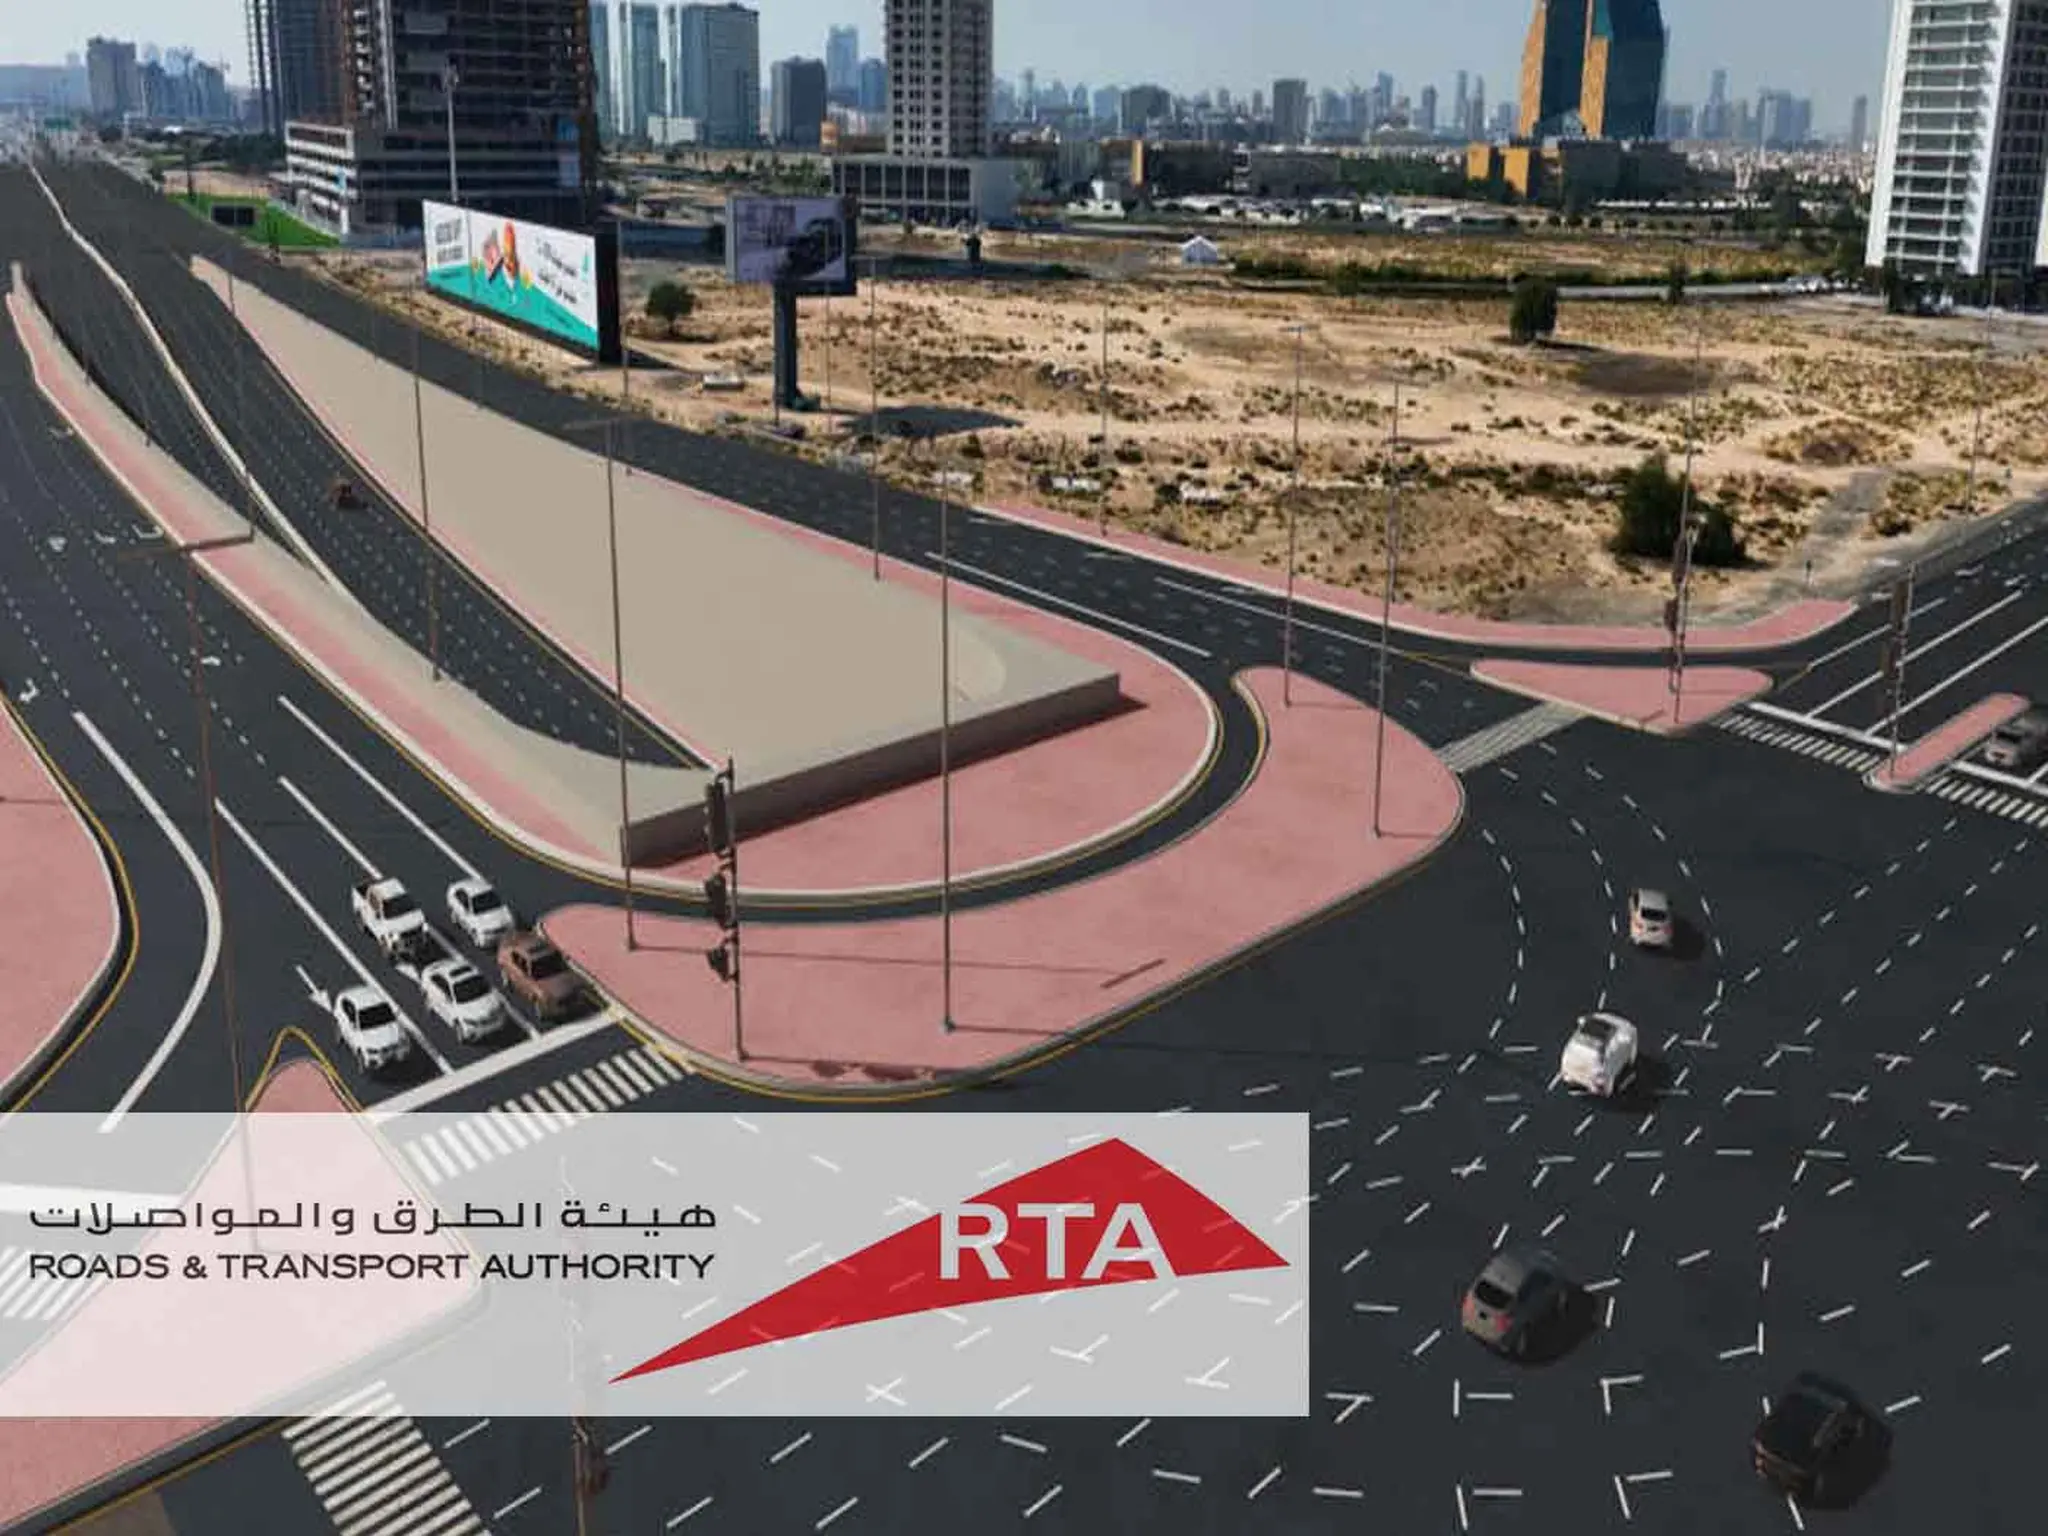 The UAE begins developing one of the main streets in Dubai for 332 million dirhams